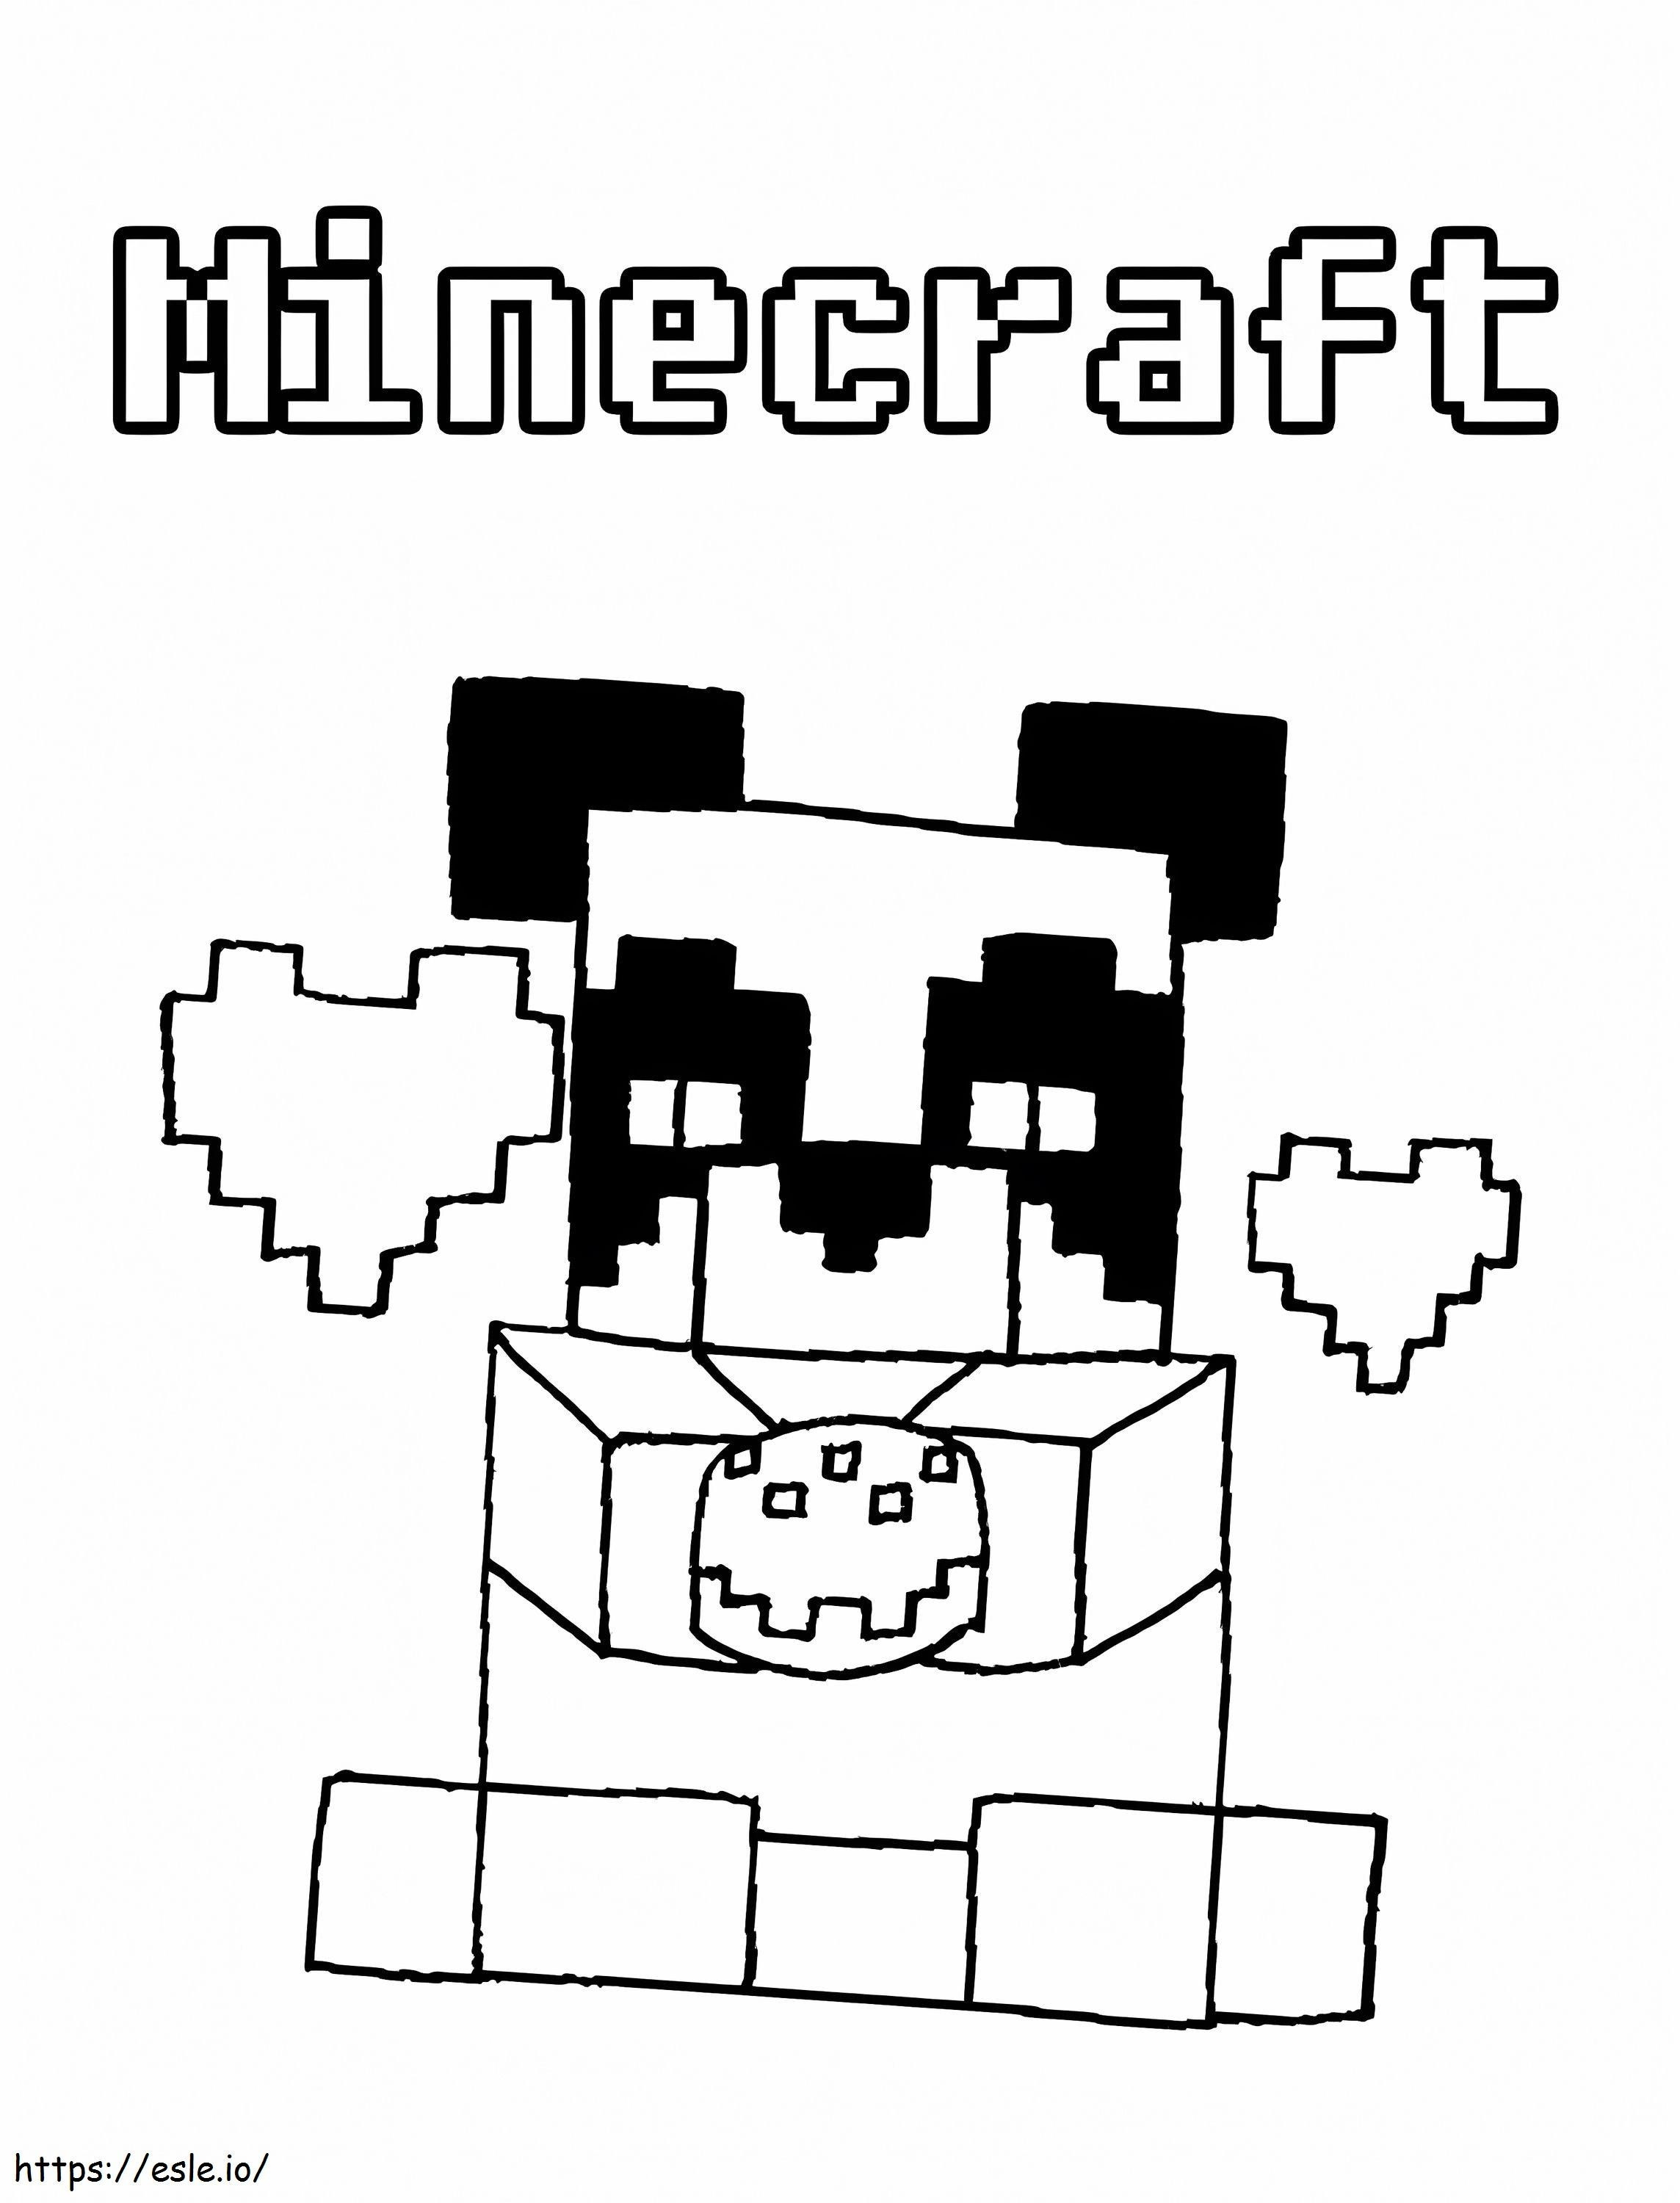 Panda A Minecraft coloring page